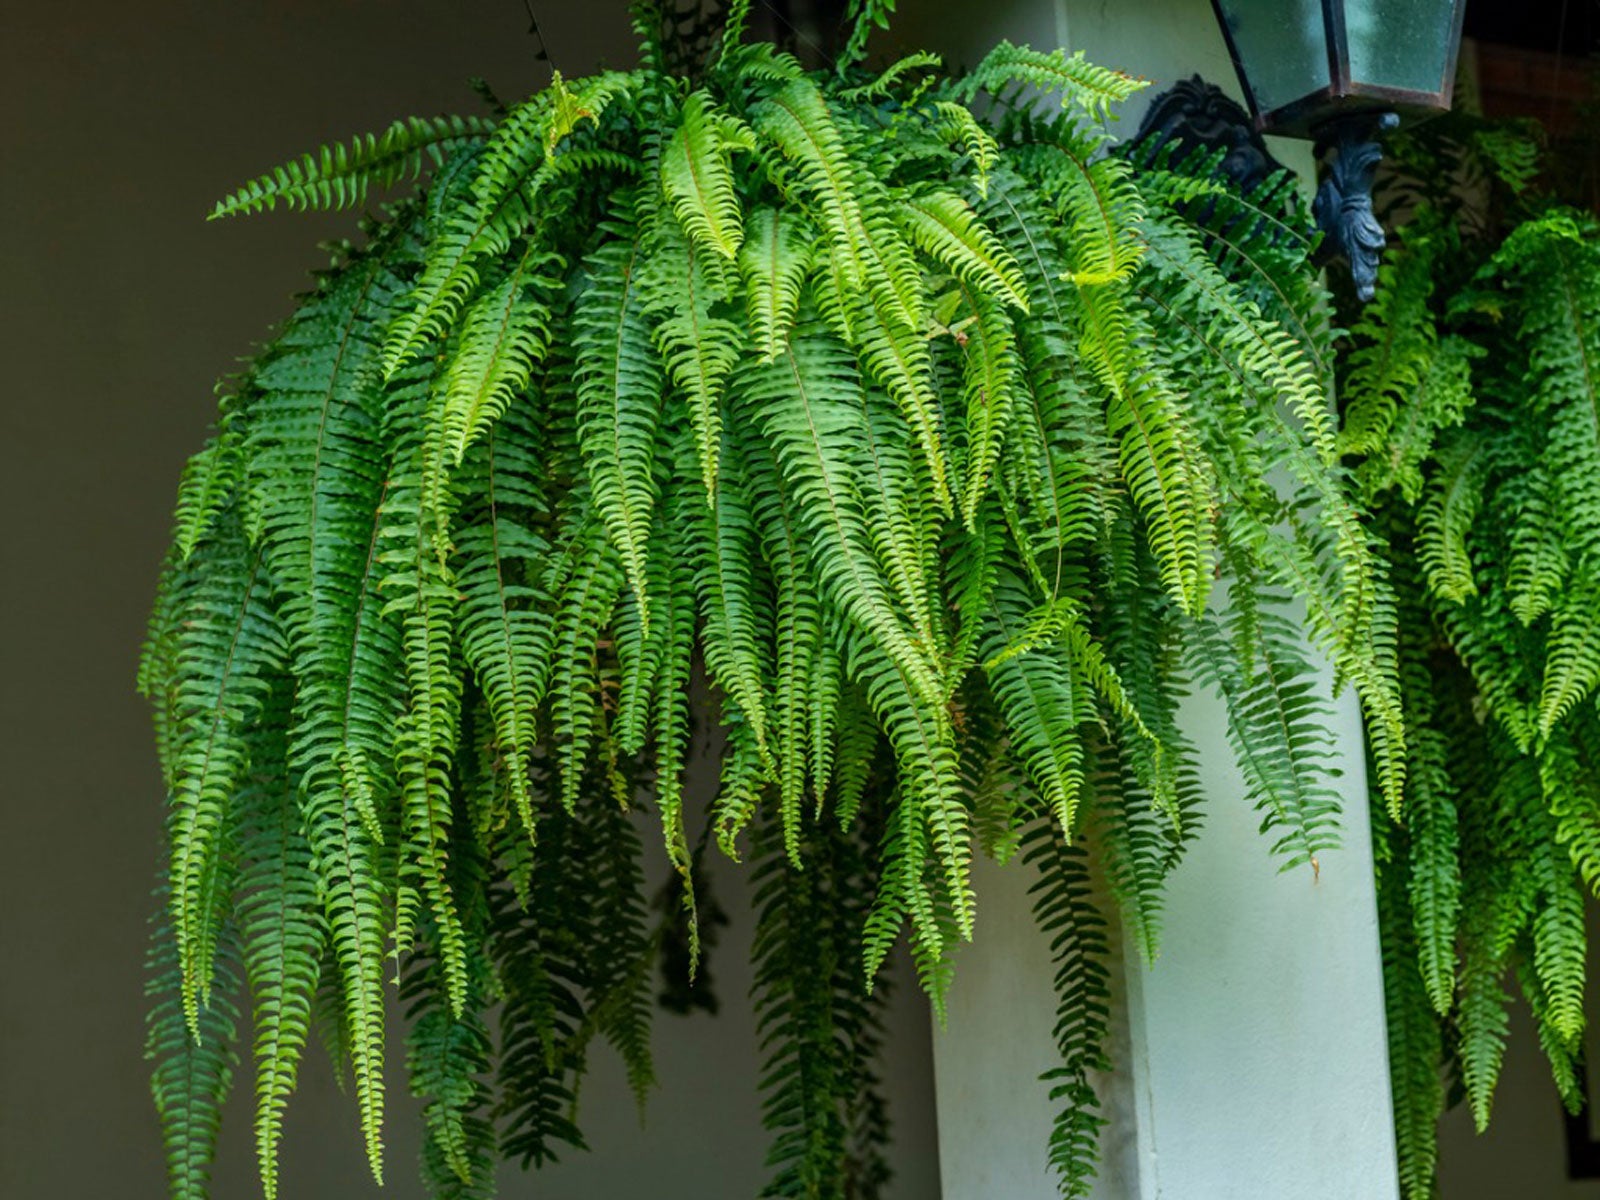 Hanging Fern Care Guide – Where Do Hanging Ferns Grow Best